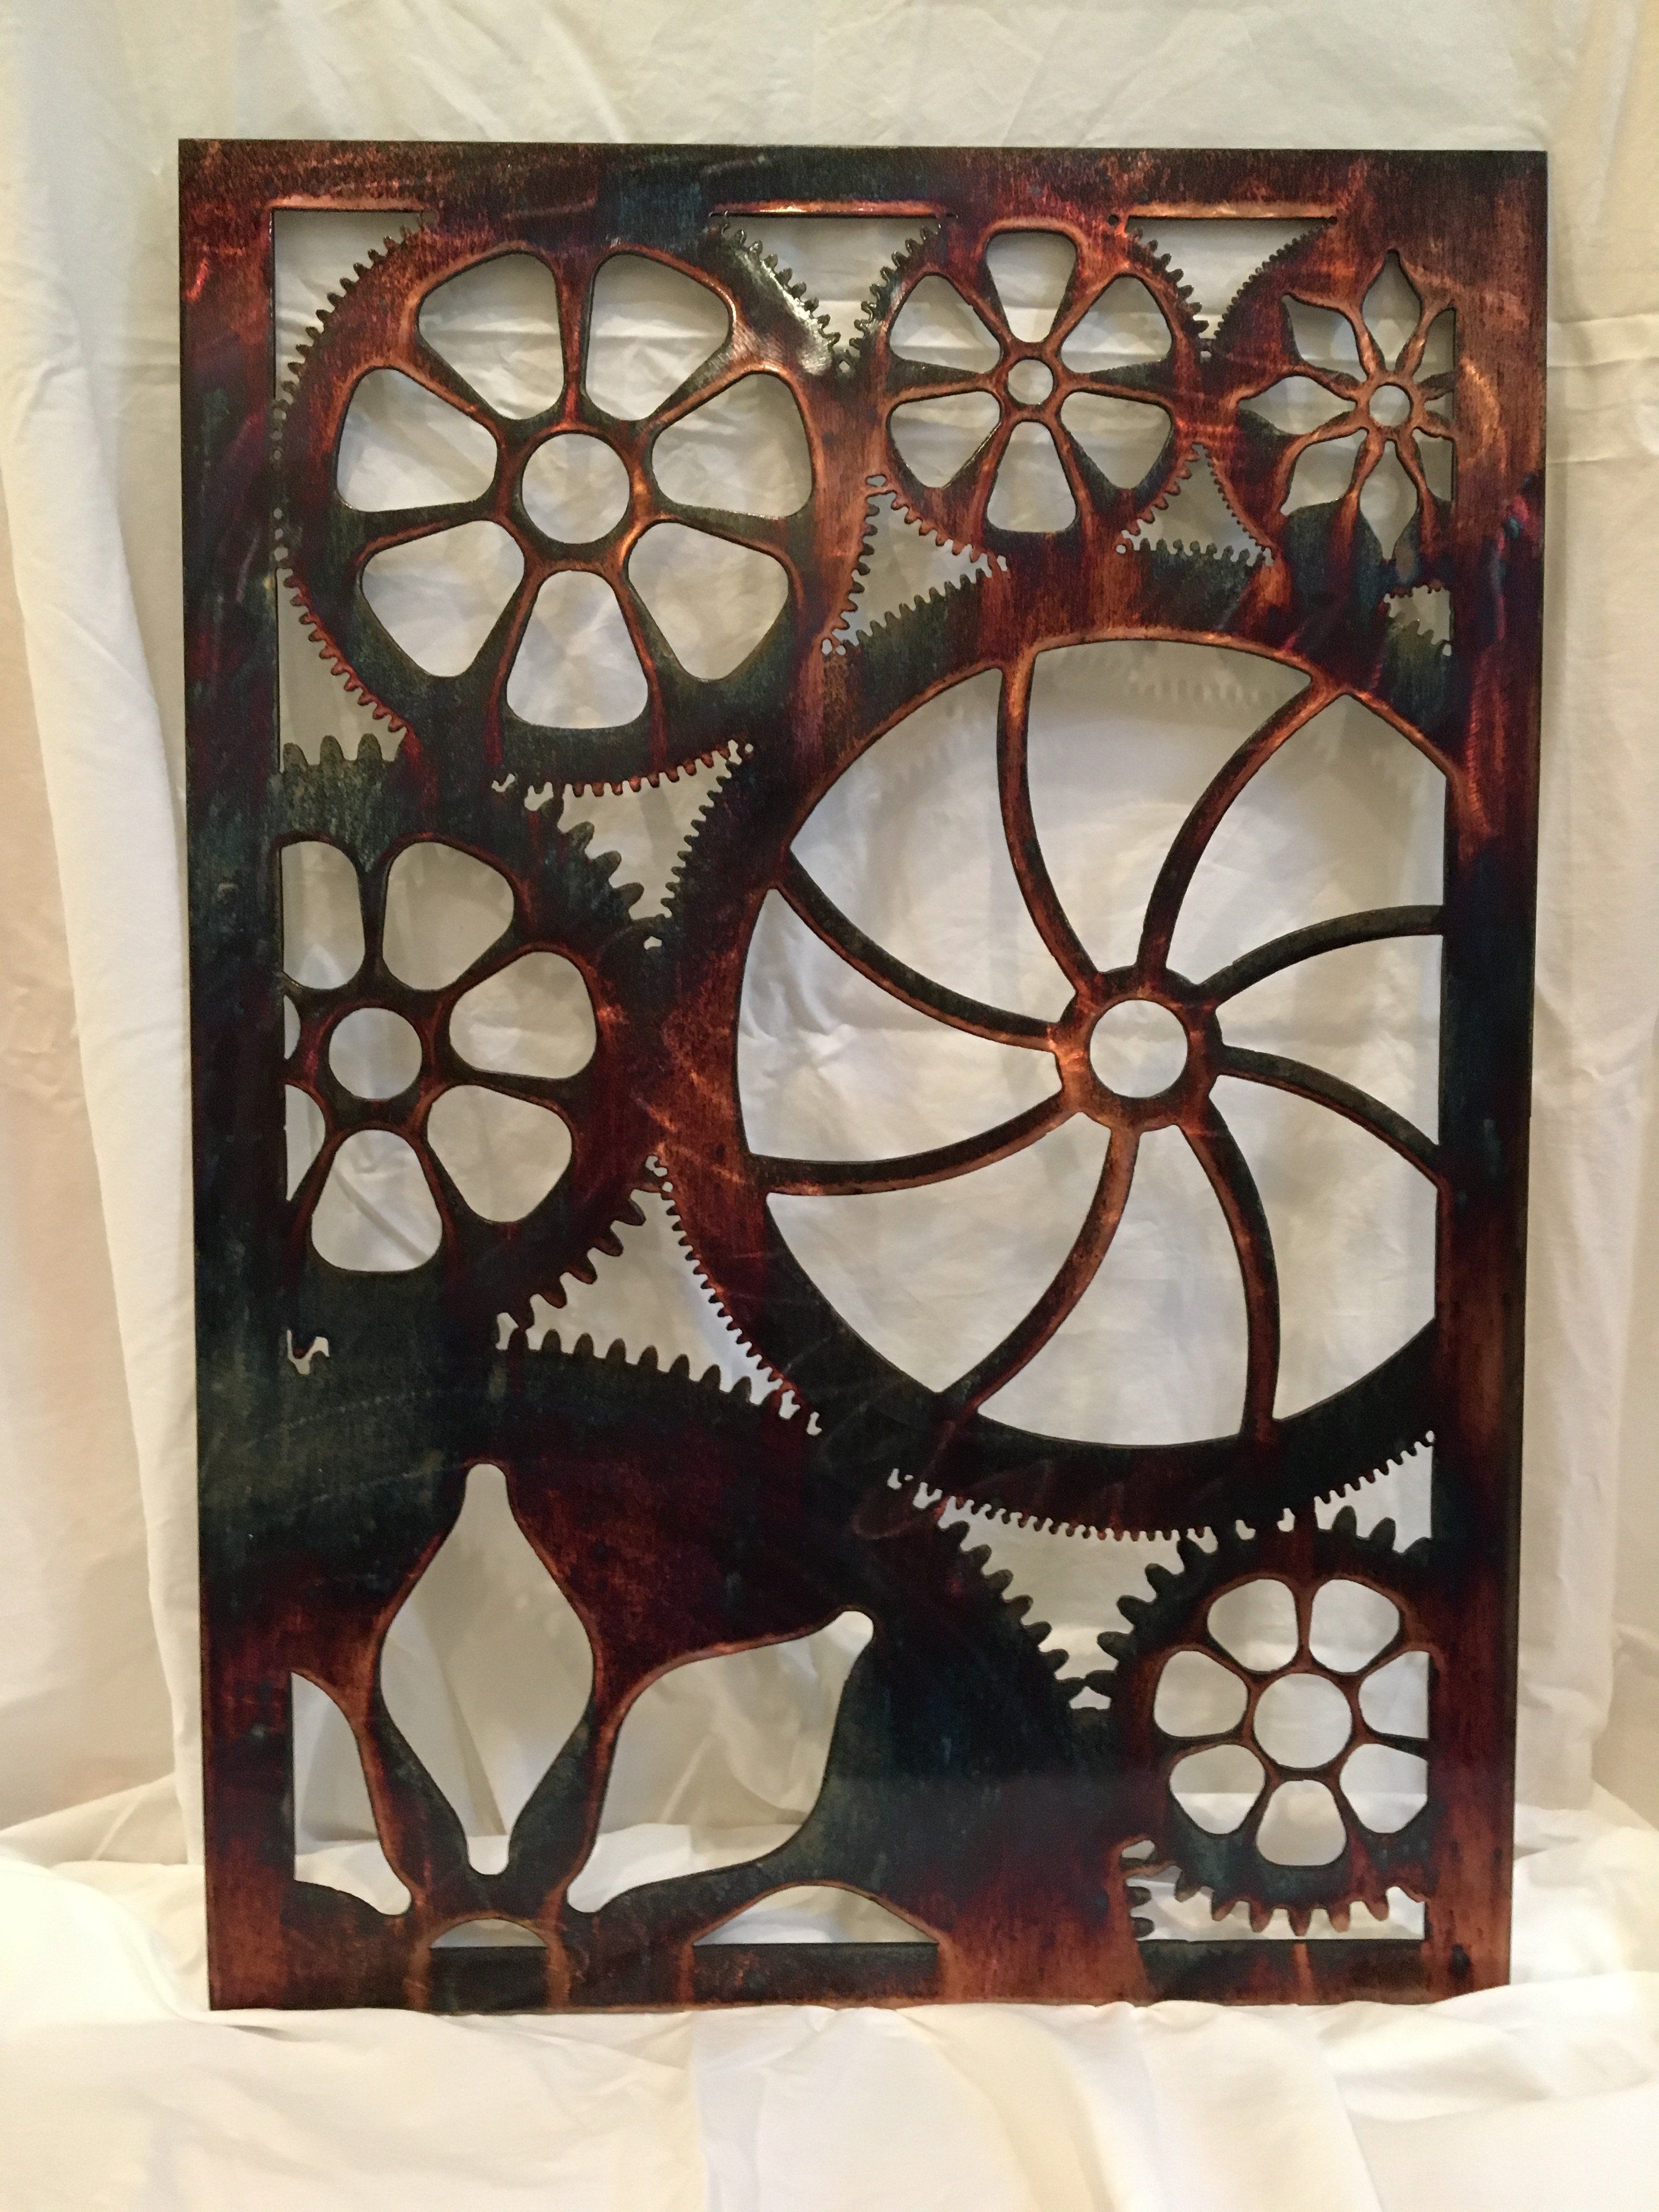 Engine House Gears Wall Art Third Shift Fabrication Copper River 